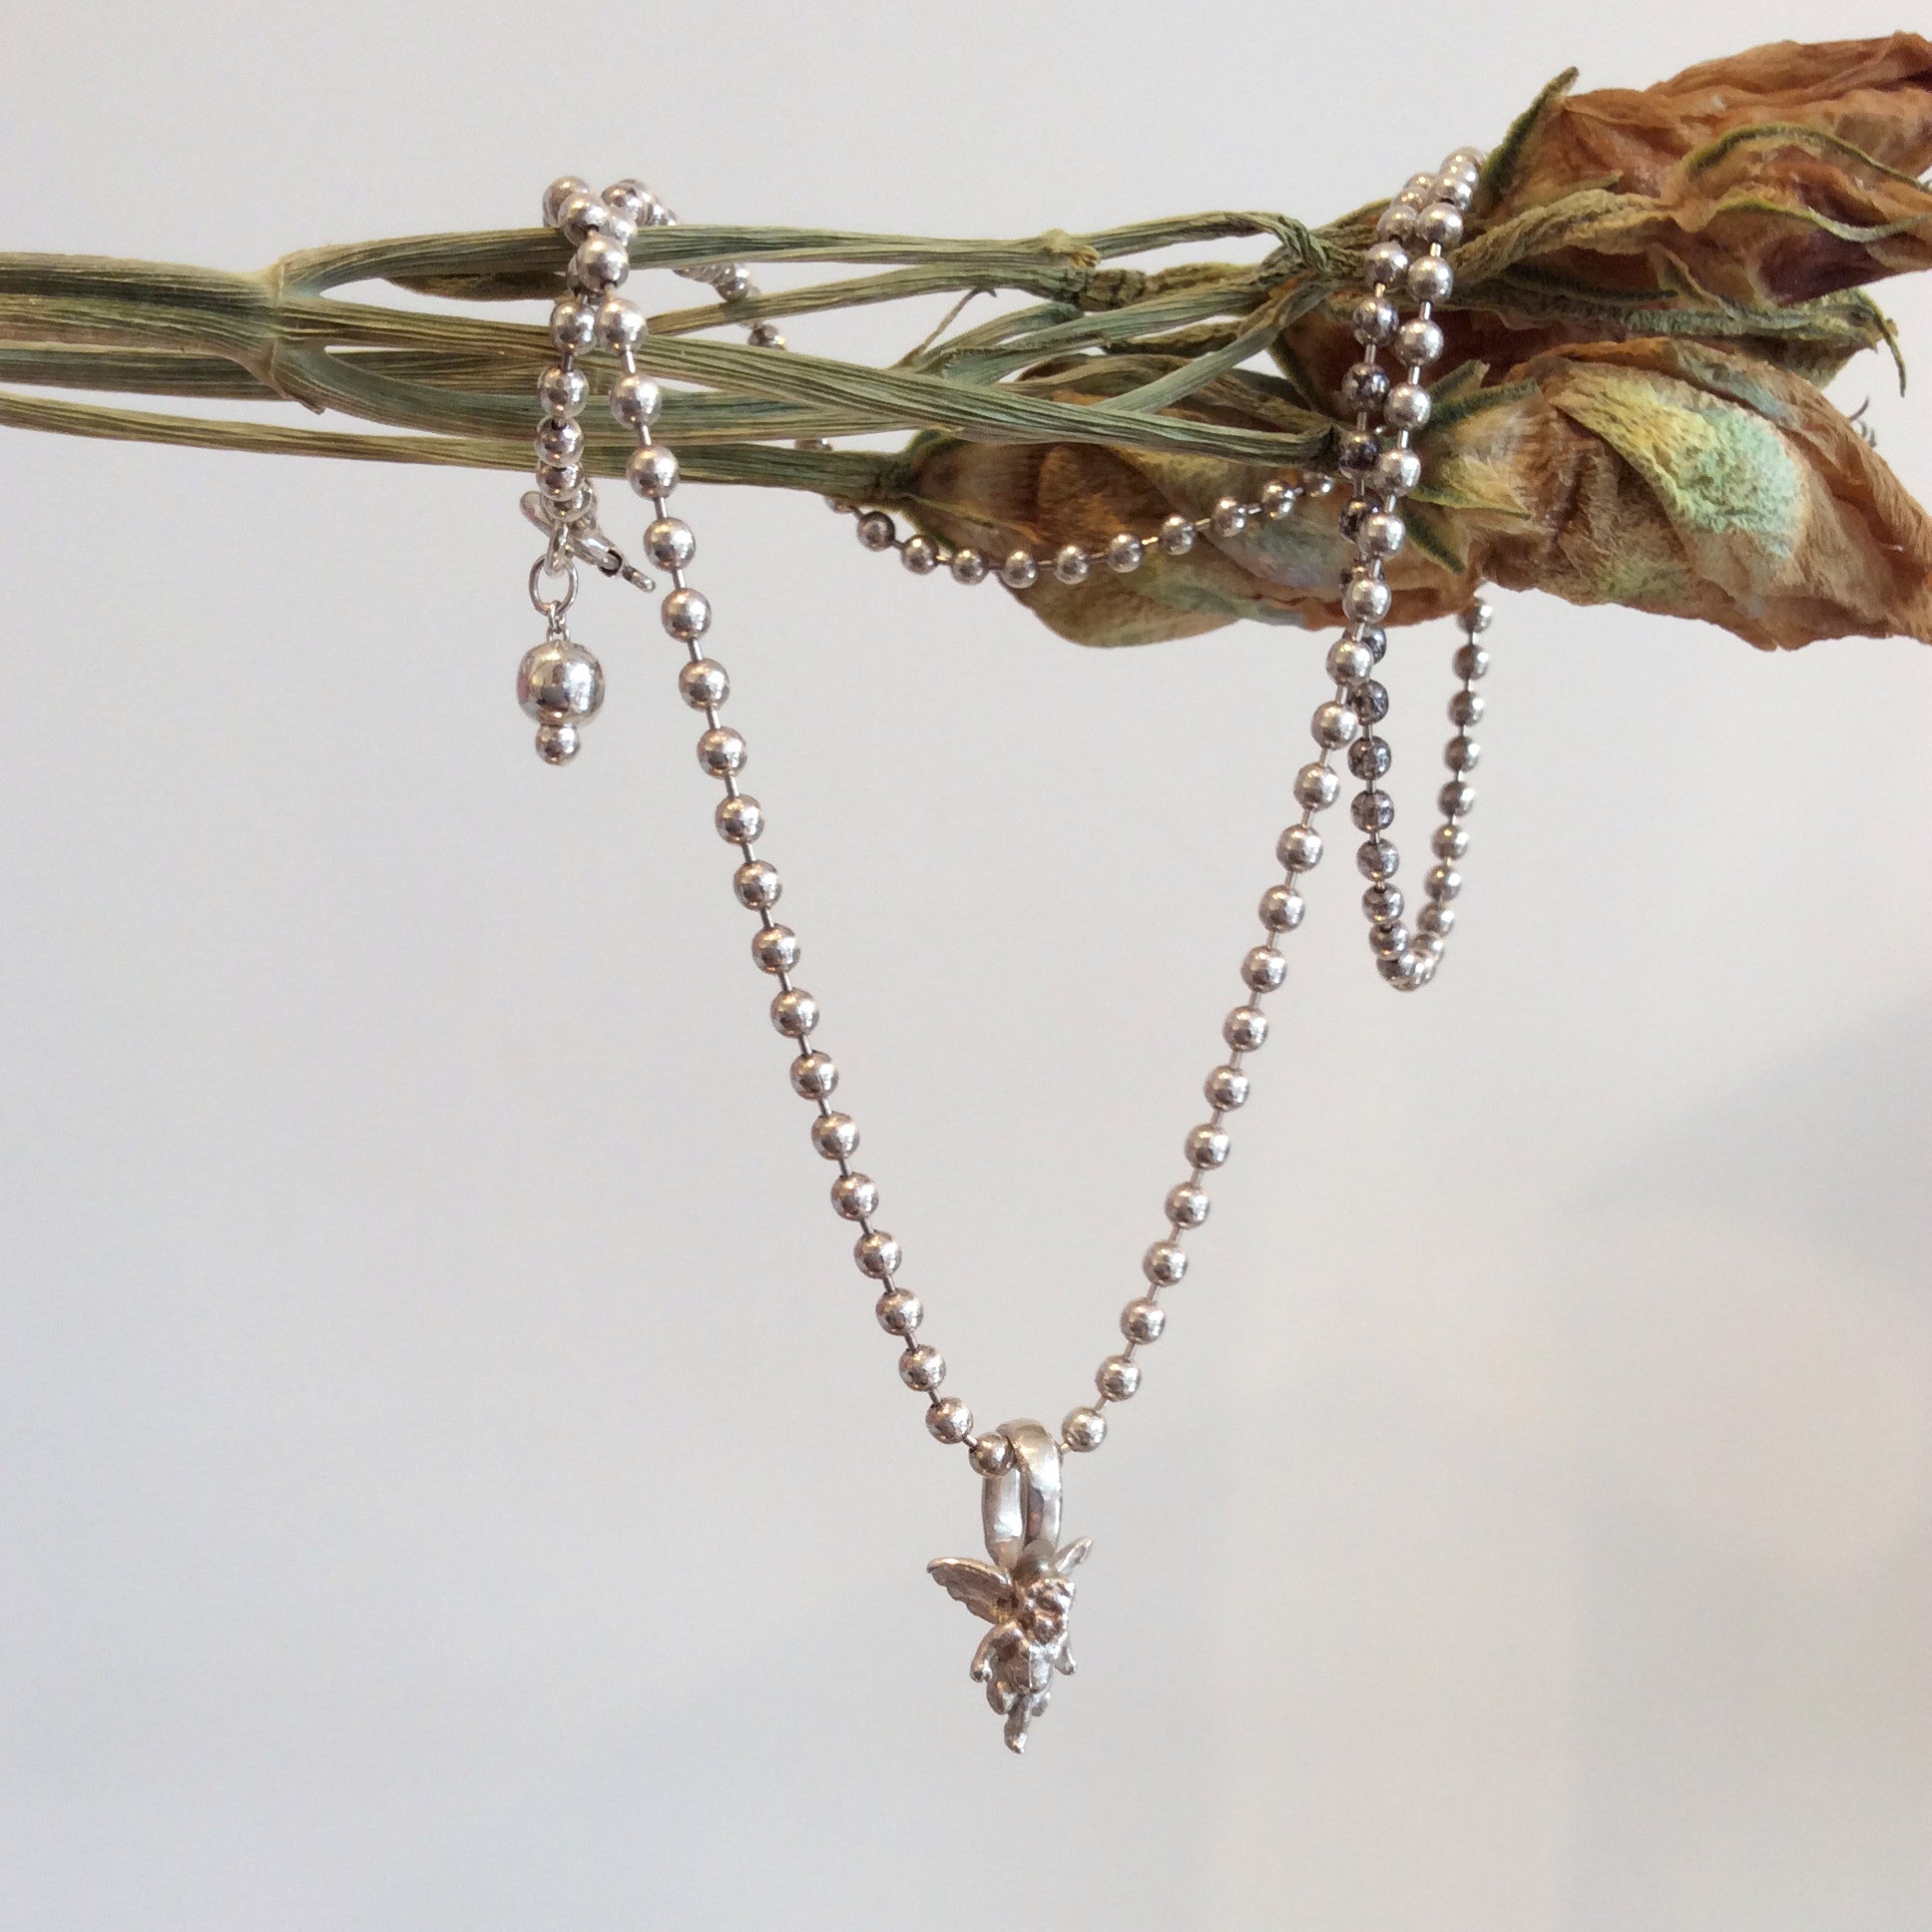 ORNAMENT & CRIME 'ANGEL' NECKLACE W/ BALL CHAIN